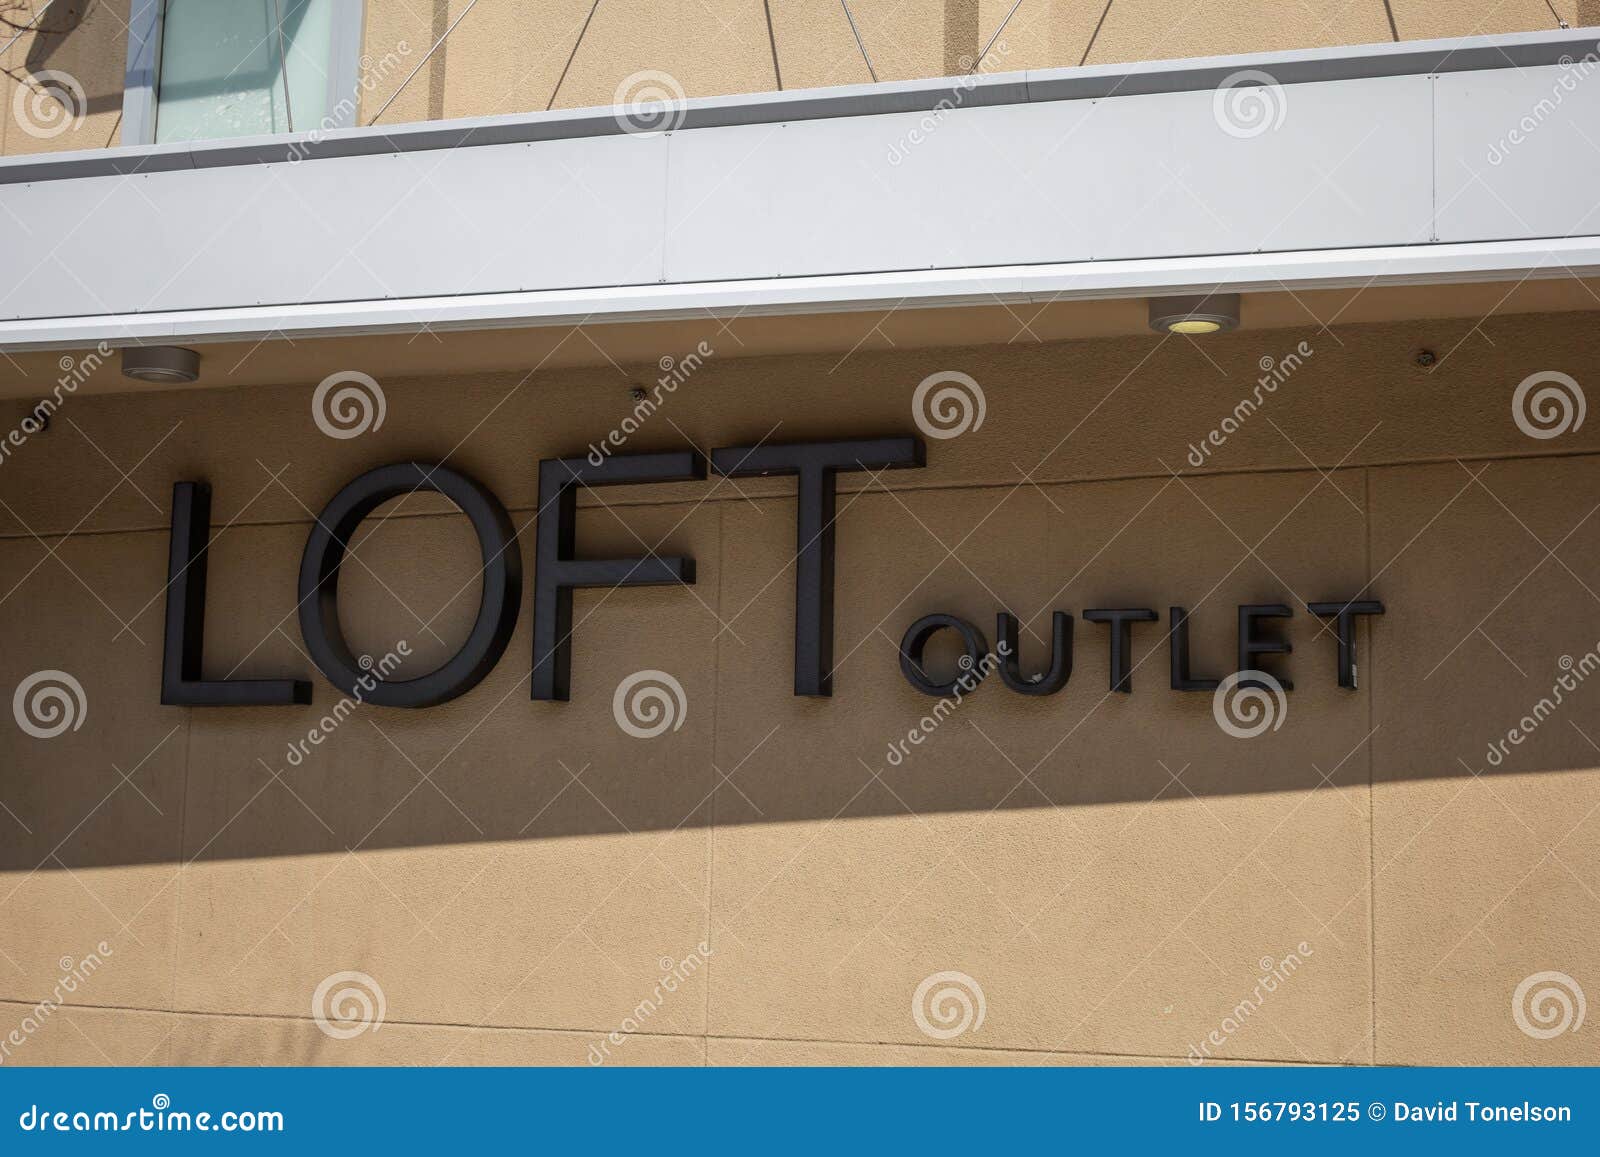 https://thumbs.dreamstime.com/z/loft-outlet-retail-store-sign-front-clothing-chain-known-as-156793125.jpg